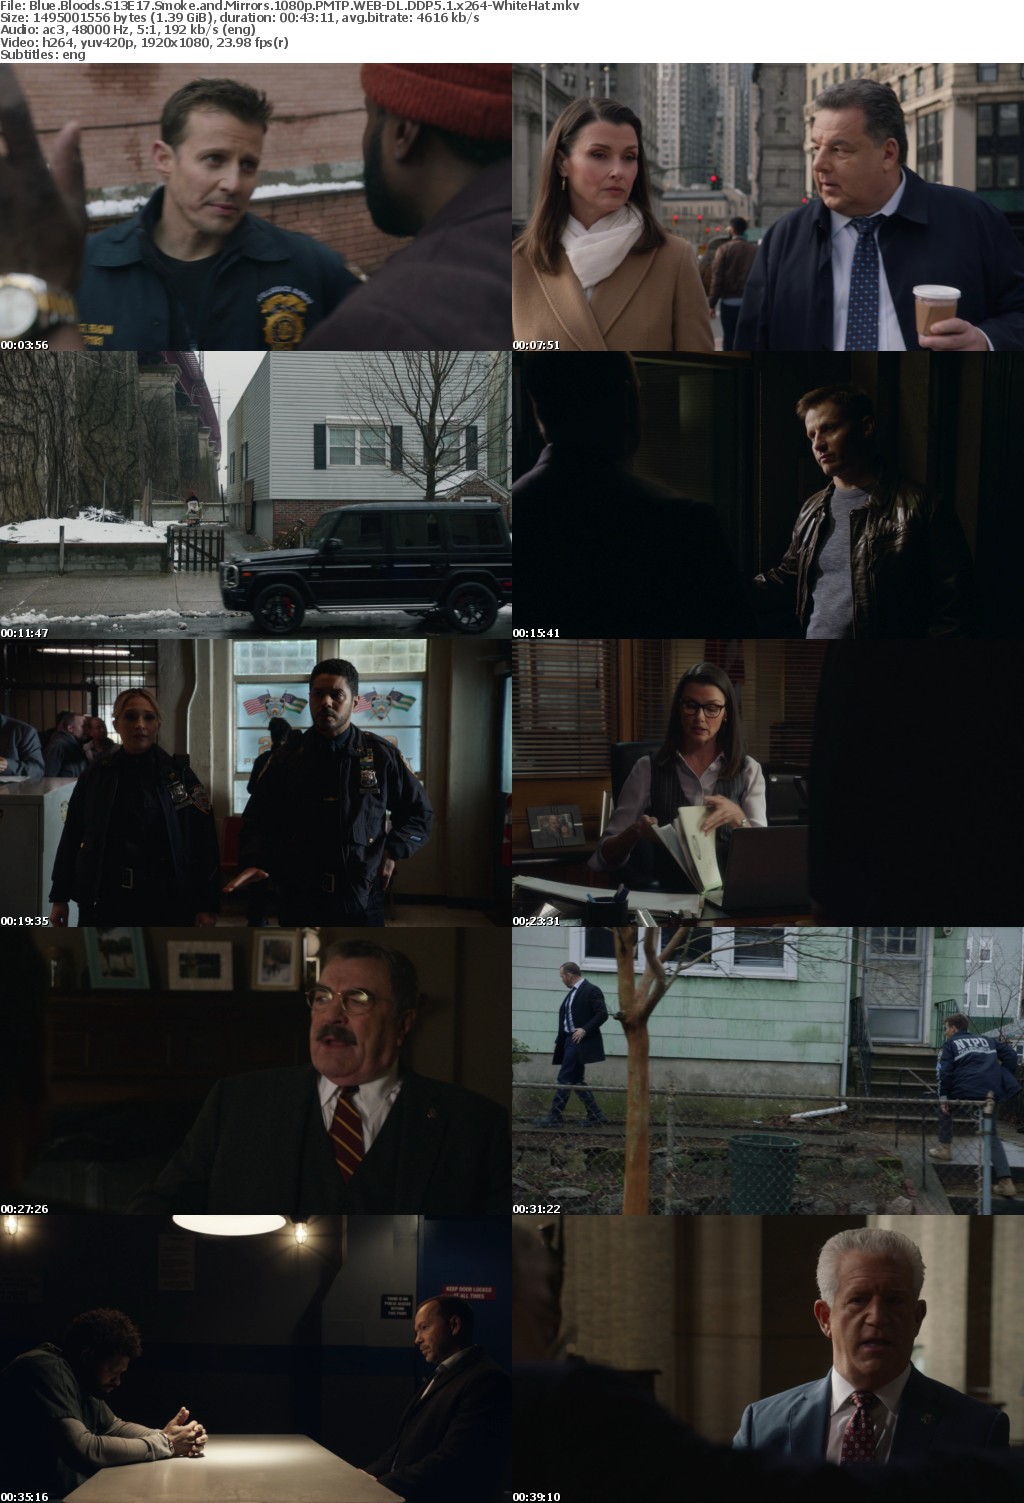 Blue Bloods S13E17 Smoke and Mirrors 1080p PMTP WEBRip DDP5 1 x264-WhiteHat